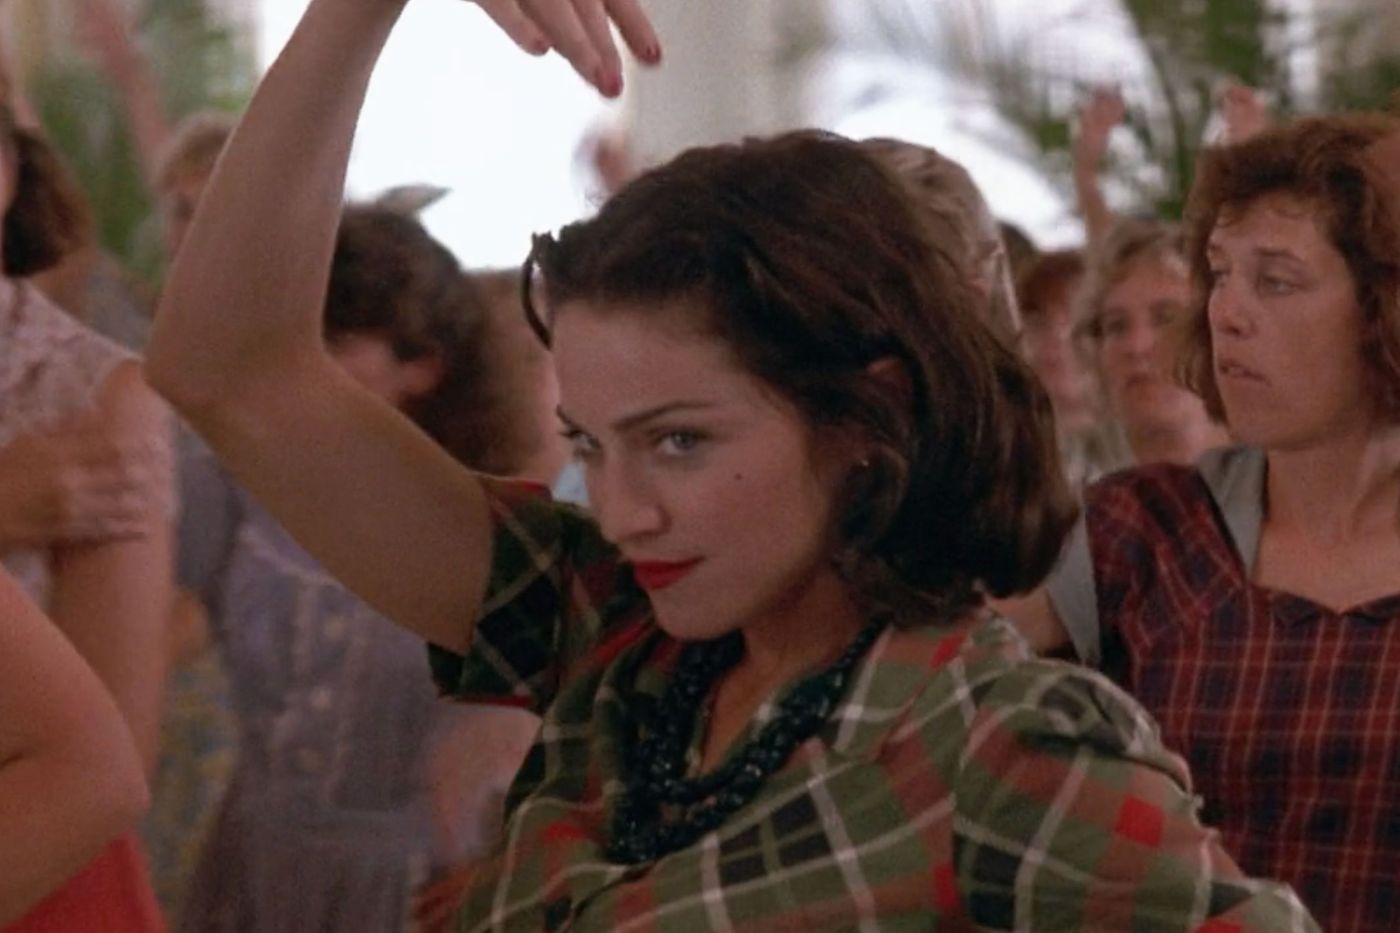 TBT: A League of Their Own (1992) – Frock Flicks